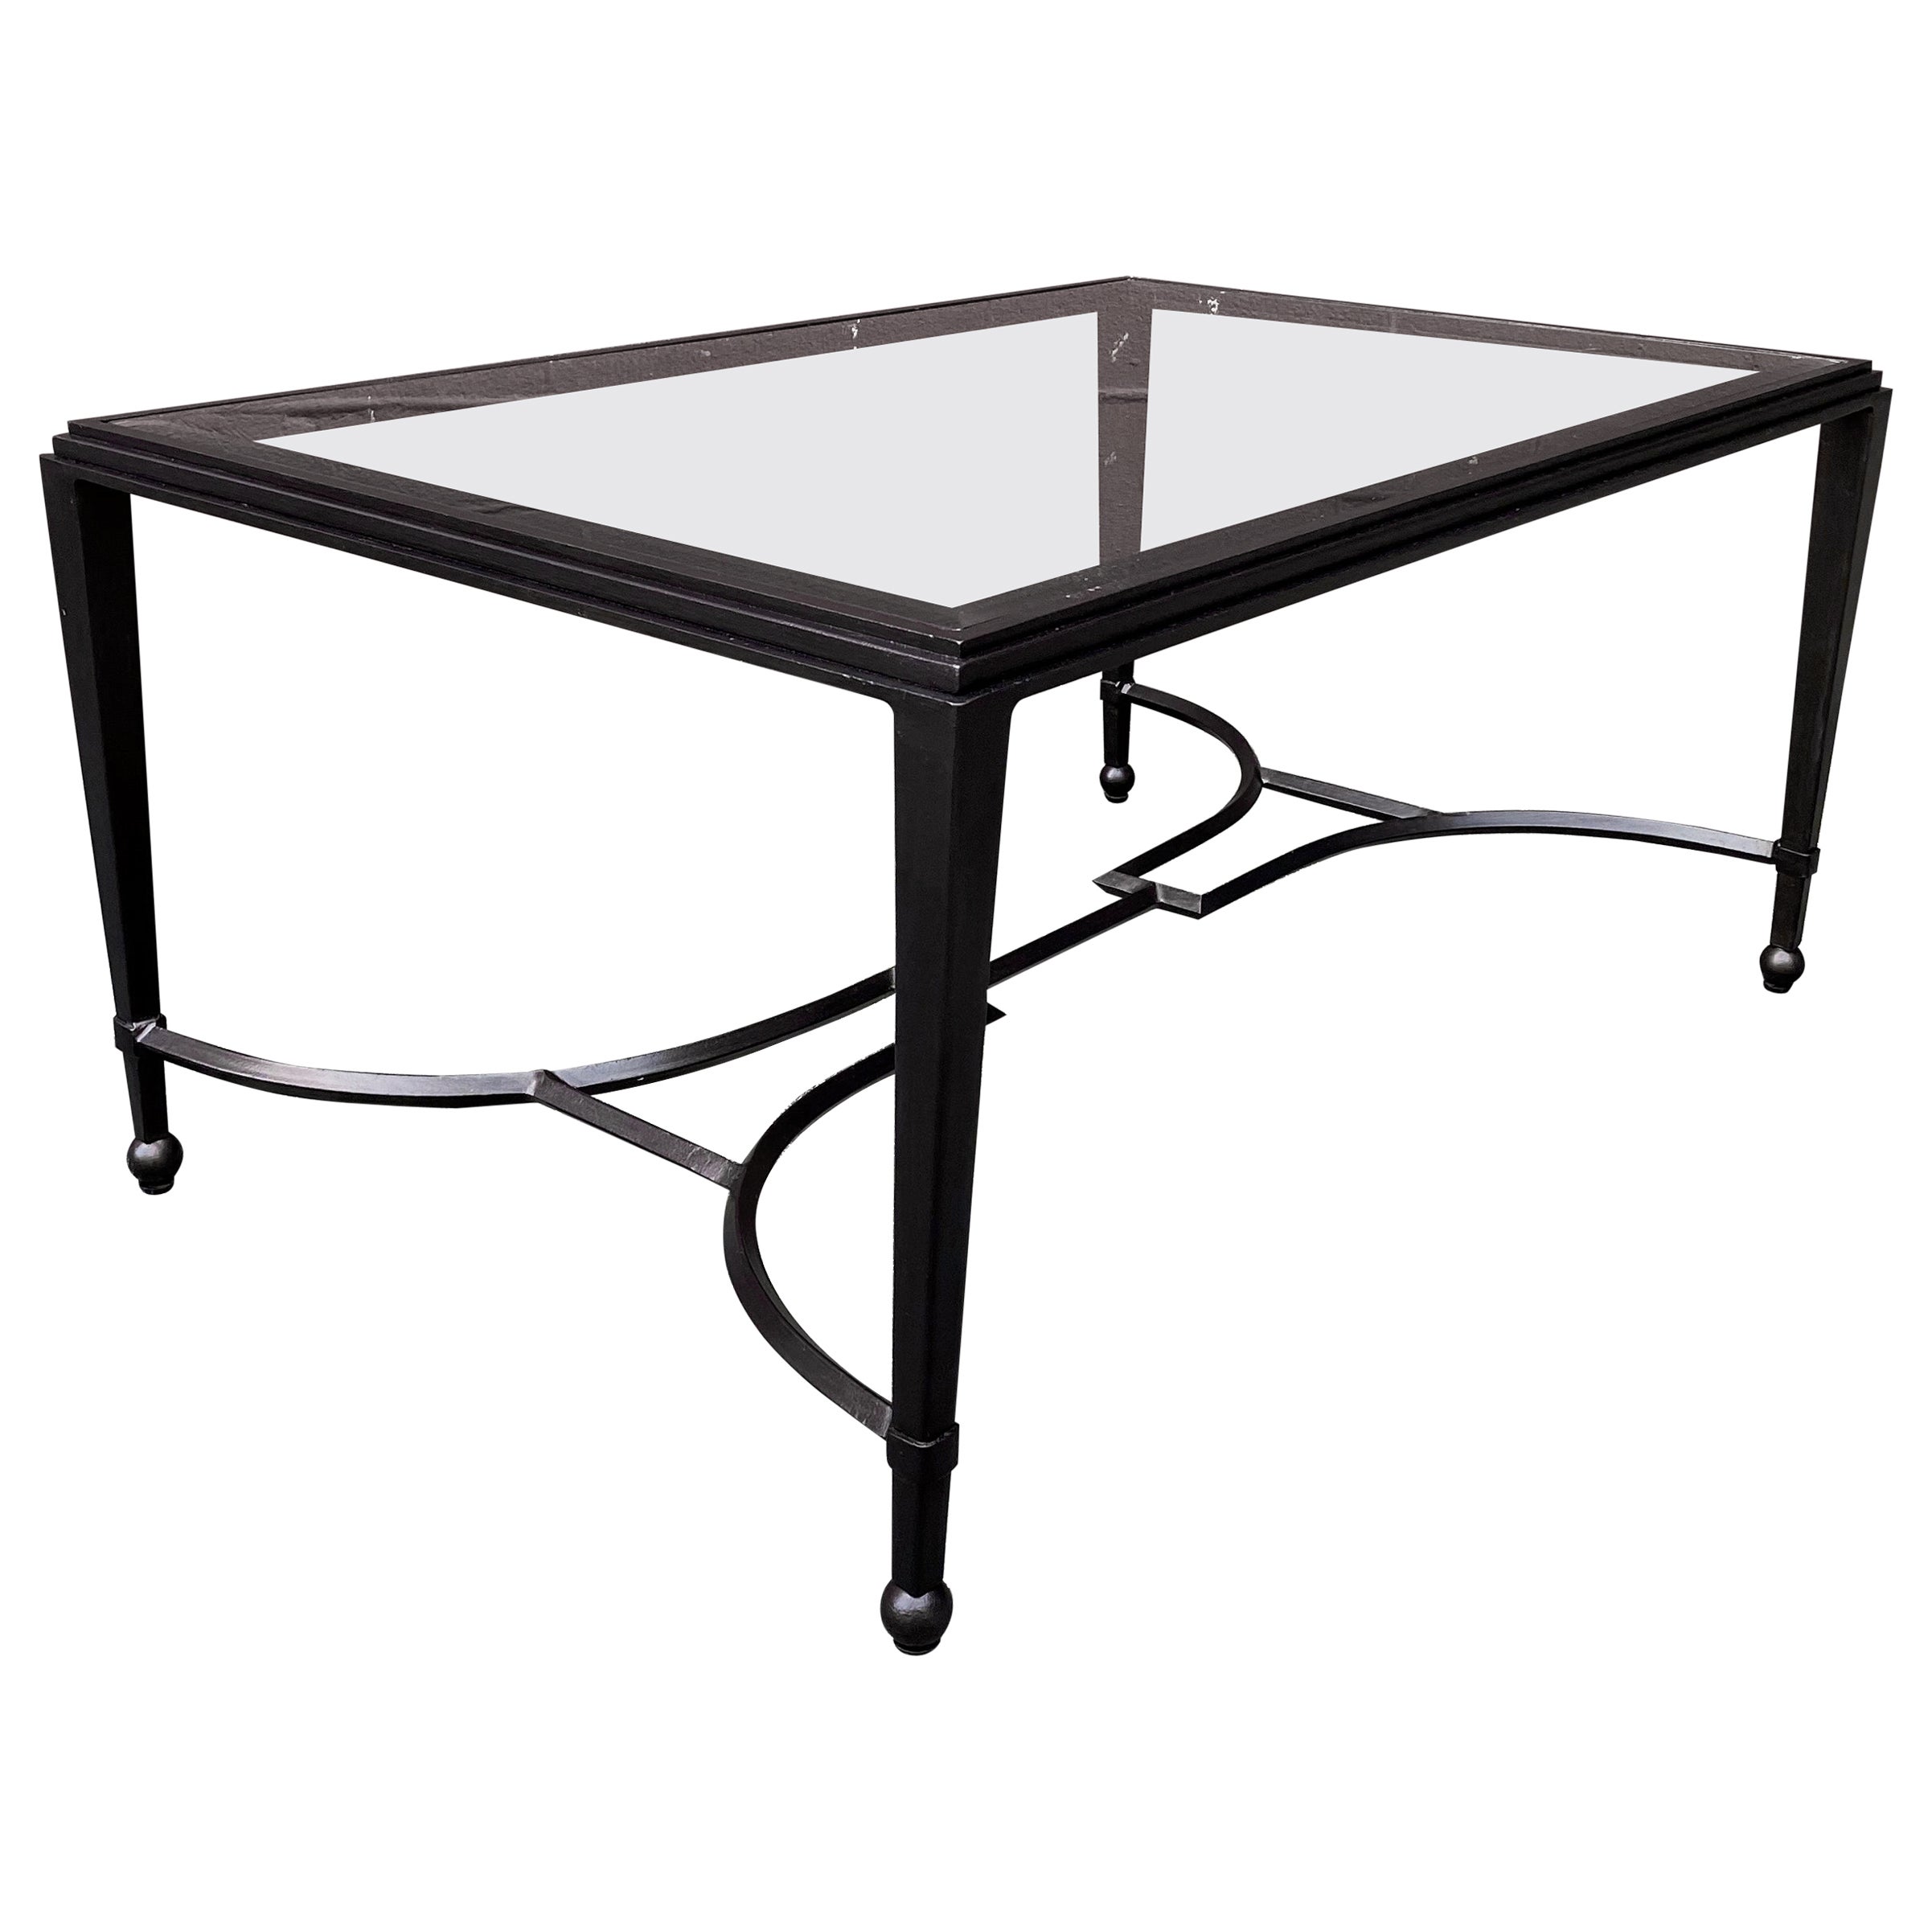 Iron and Glass Coffee Table in Patinated Bronze Finish